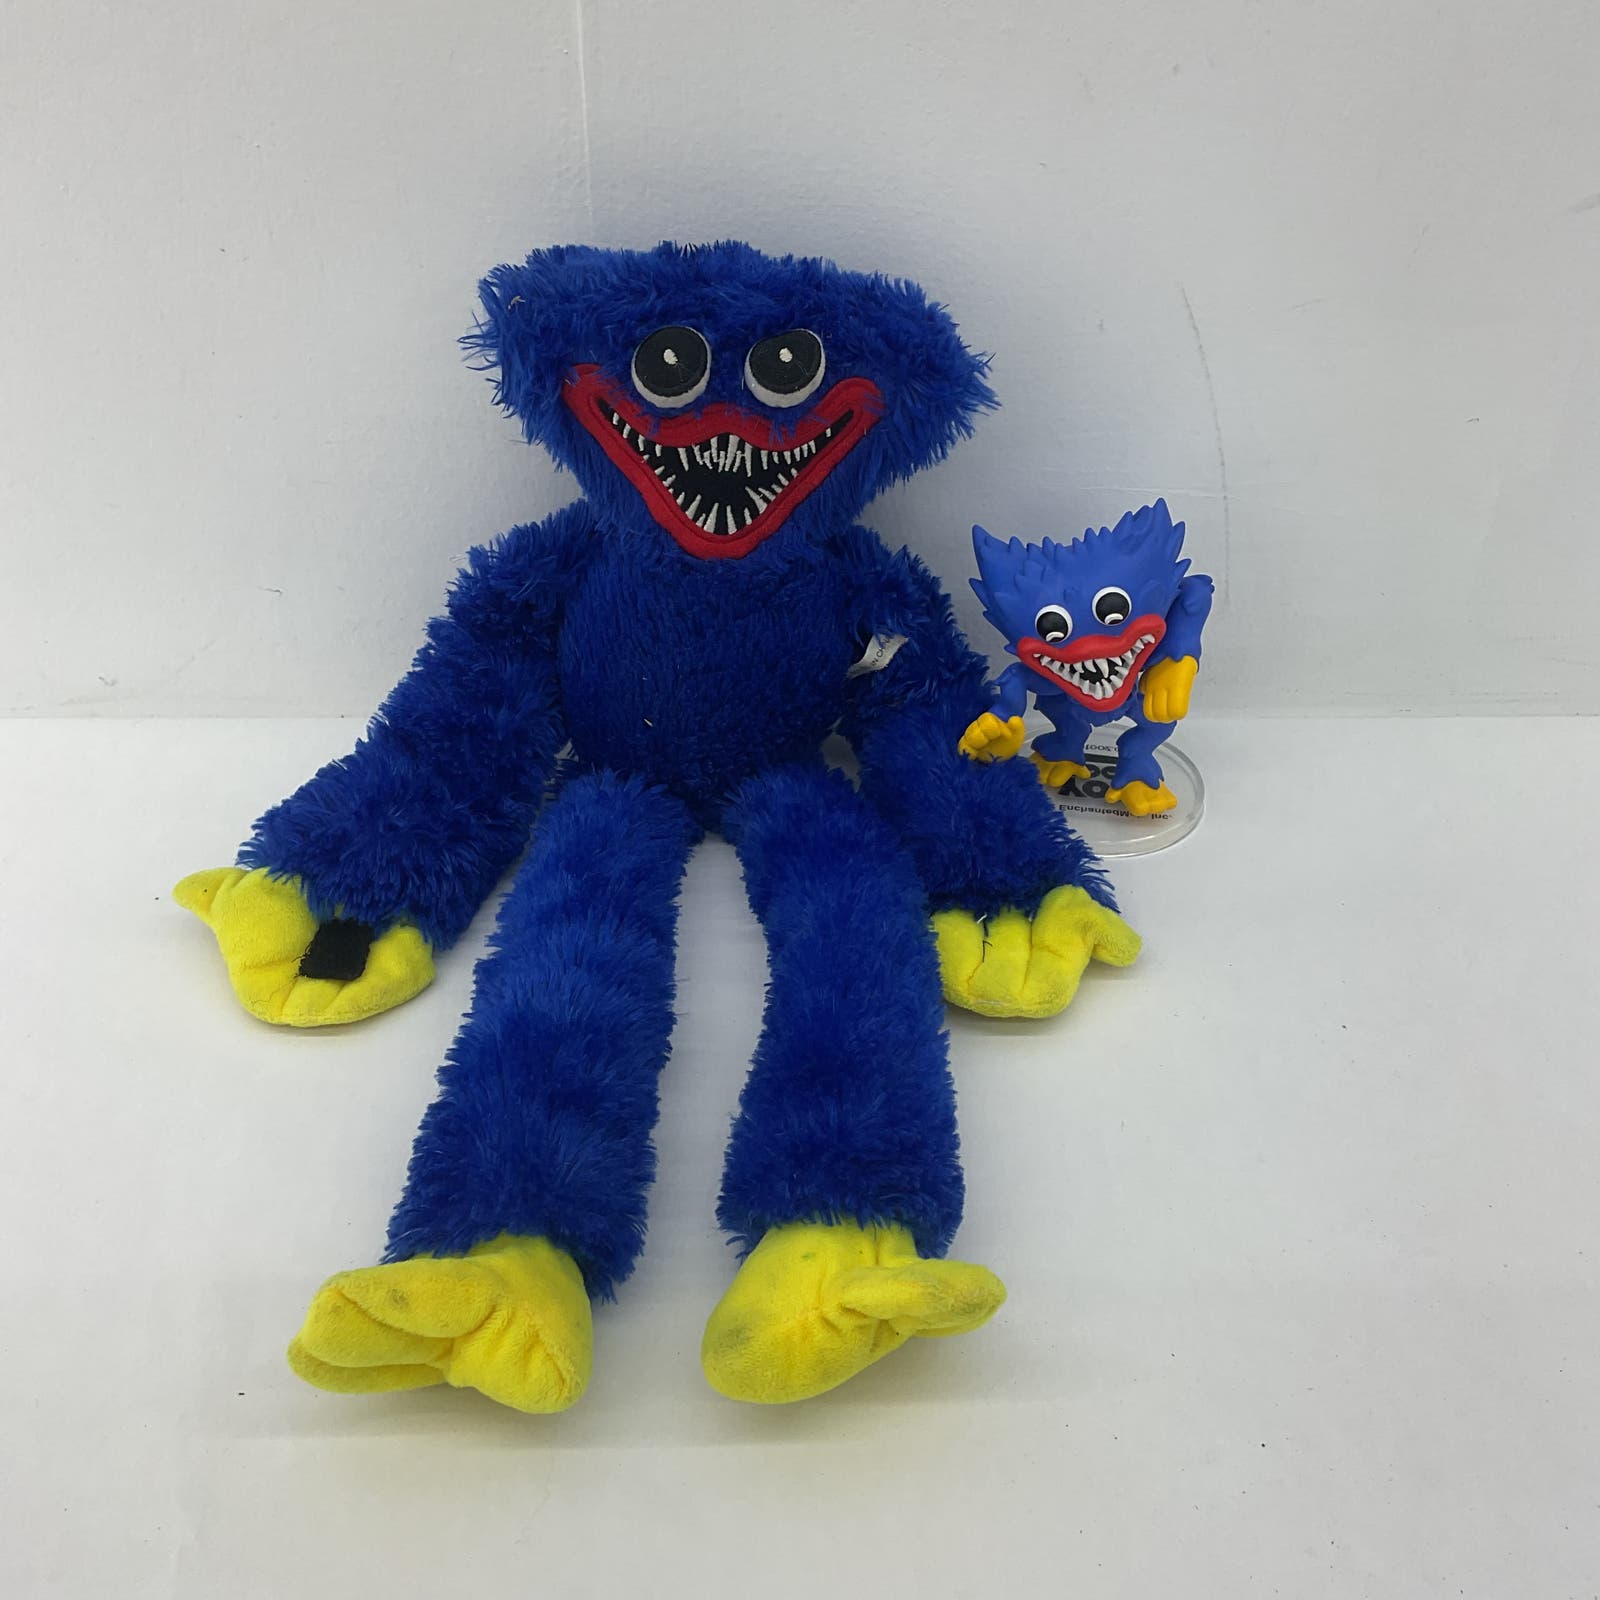 Large Angry Poppy Playtime Blue Huggy Wuggy Plush & Youtooz Toy 